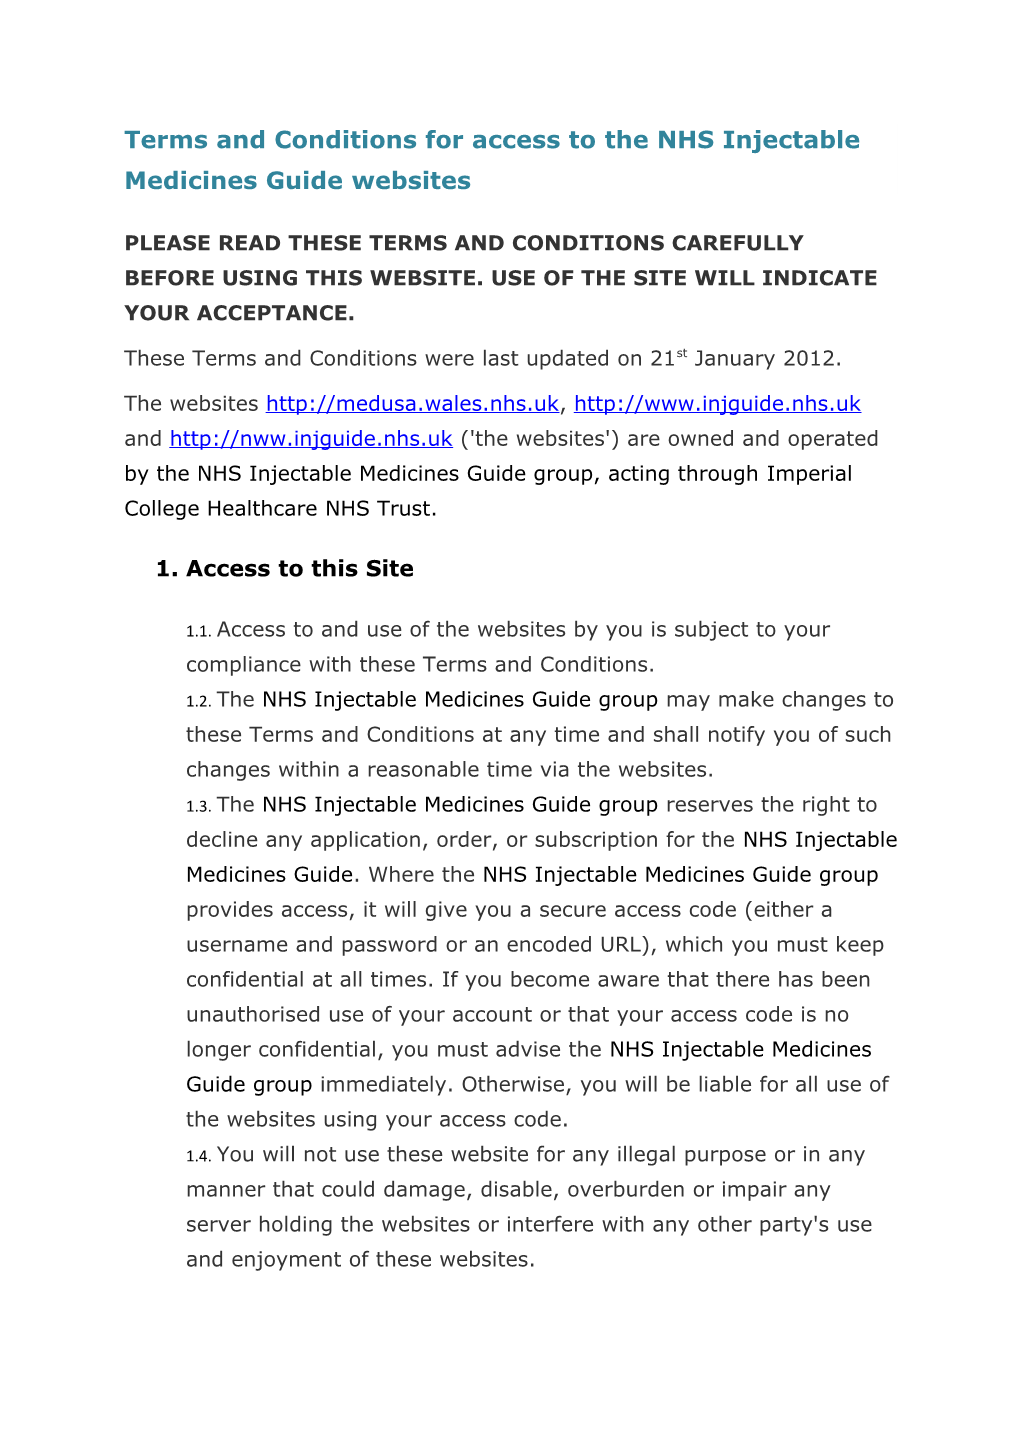 Terms and Conditions for Access to the NHS Injectable Medicines Guidewebsites